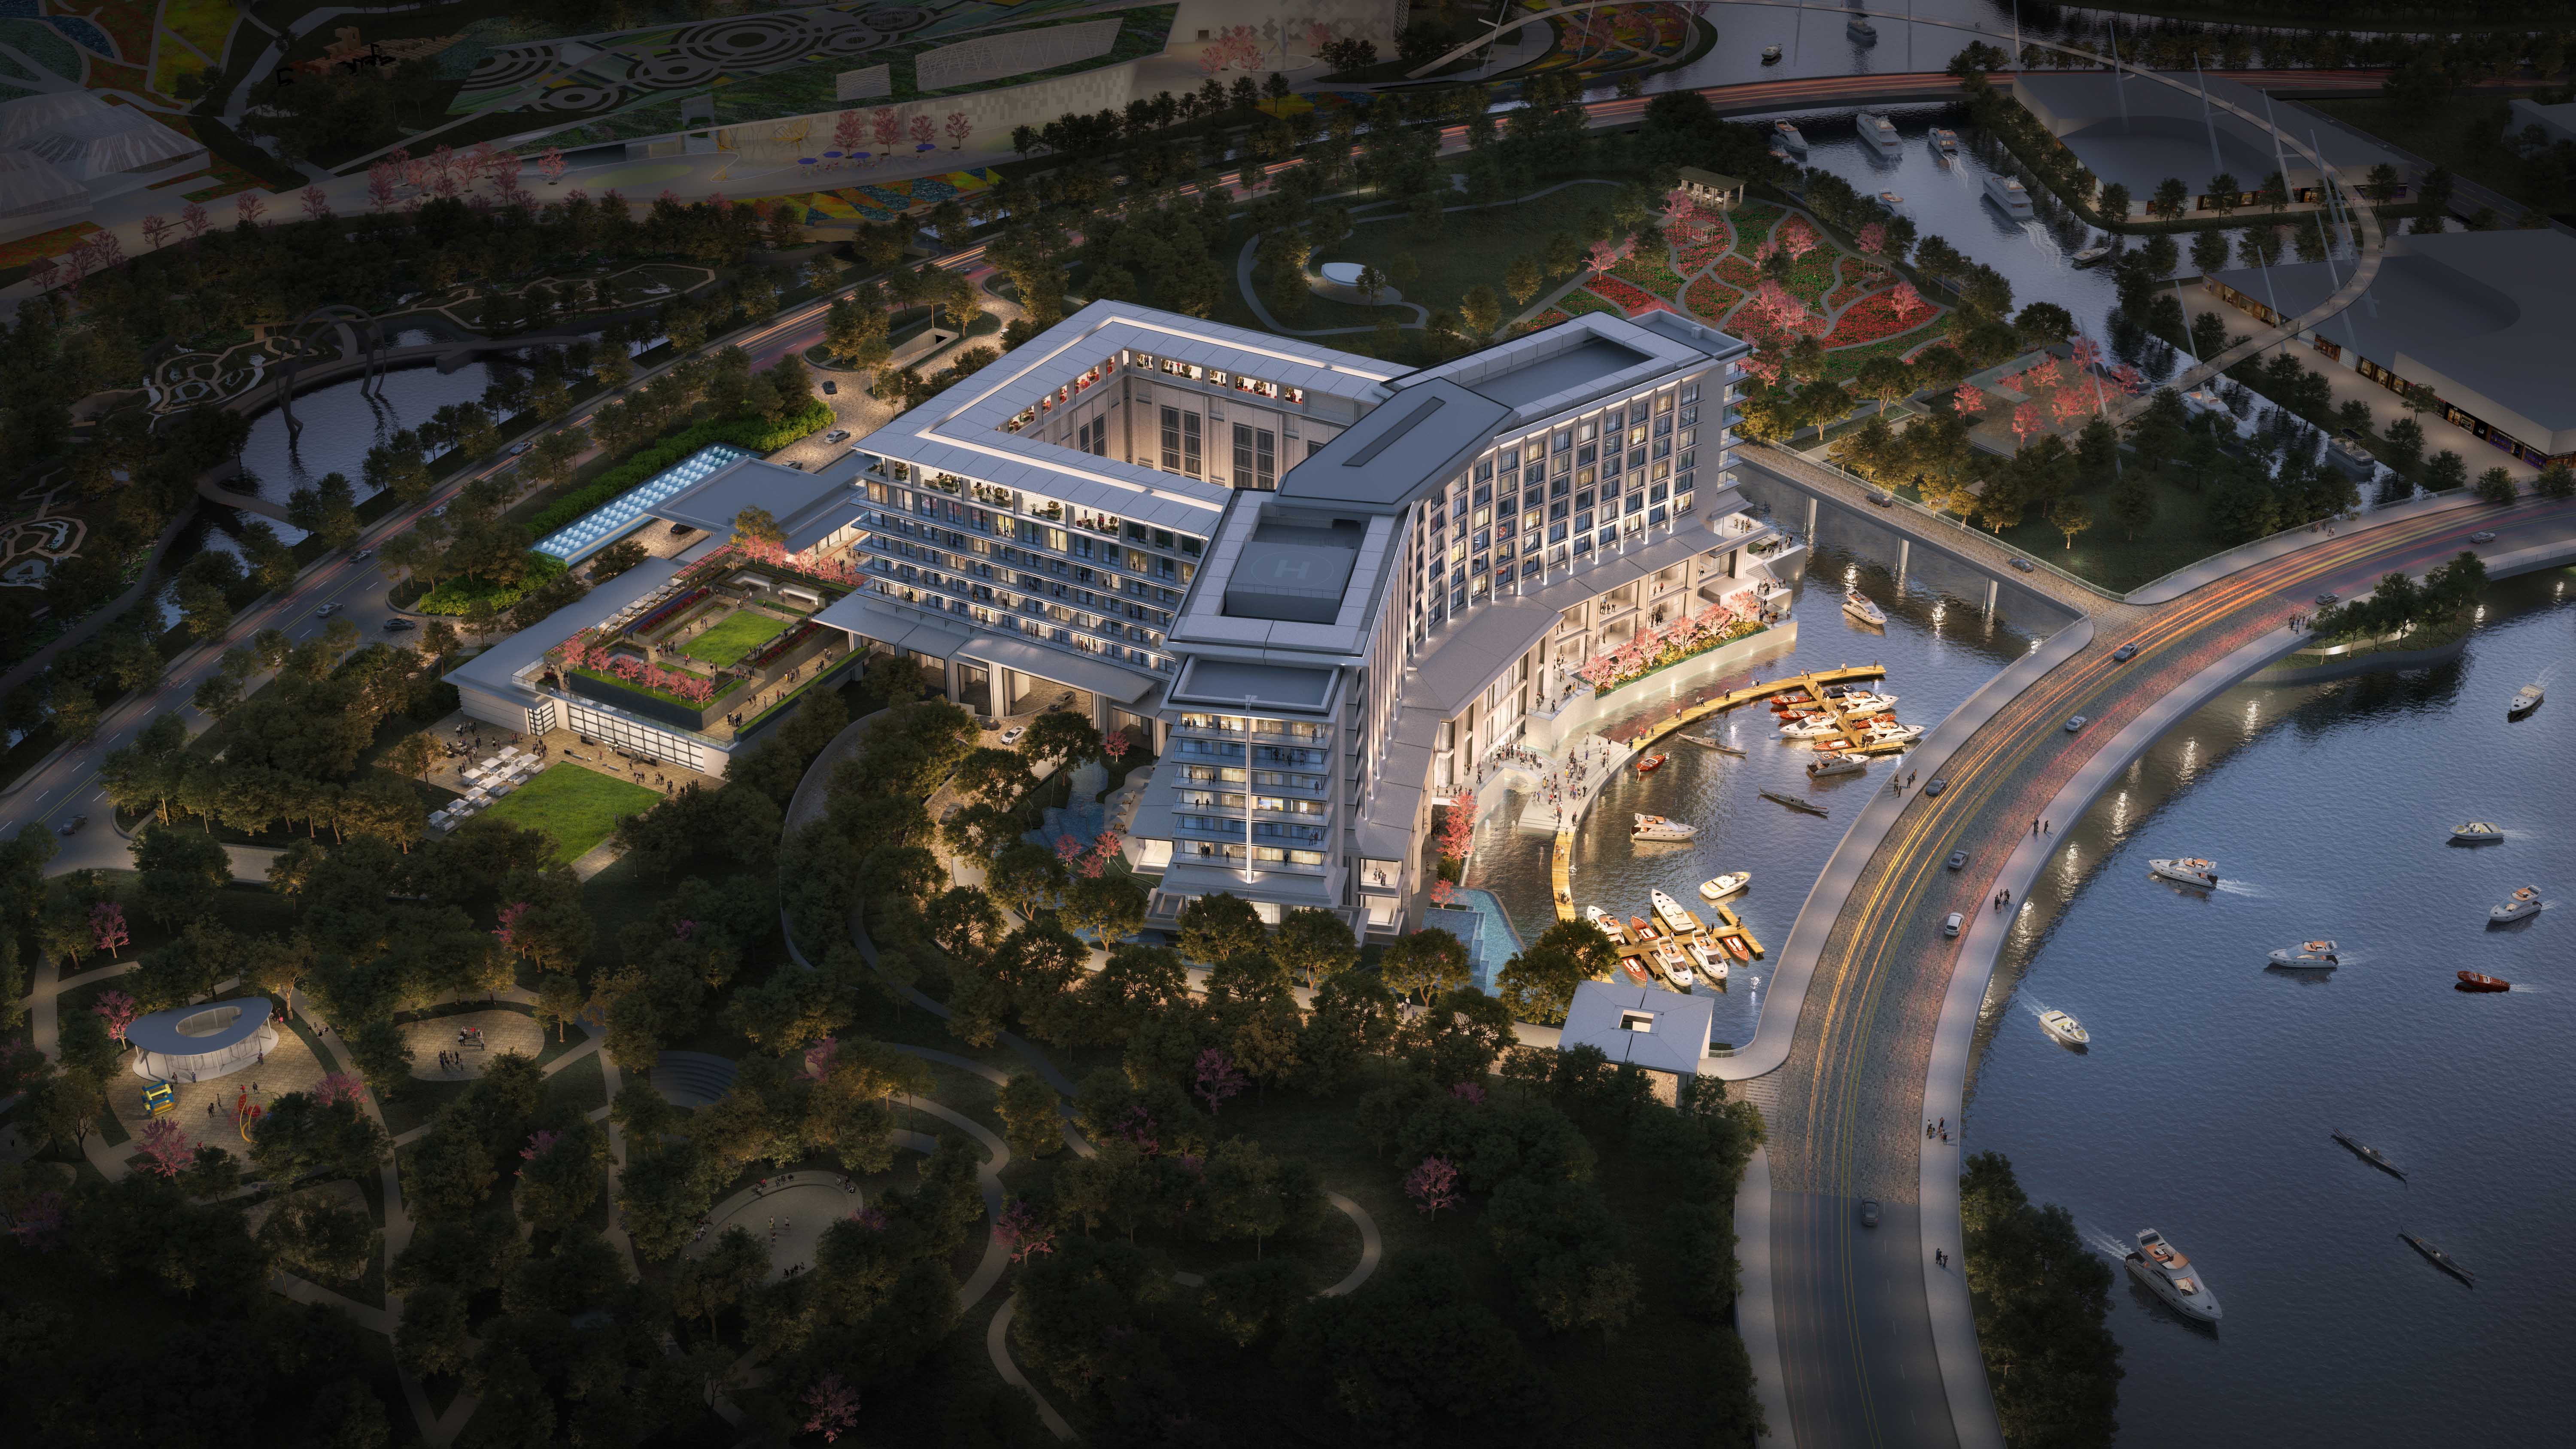 Orchid Lake Hotel in China’s Zizhu Hi-Tech Industrial Development Zone will feature conference, reception and work space and an executive lounge, as well as 360 guest rooms, a spa and gymnasium. (Rendering courtesy of WATG)